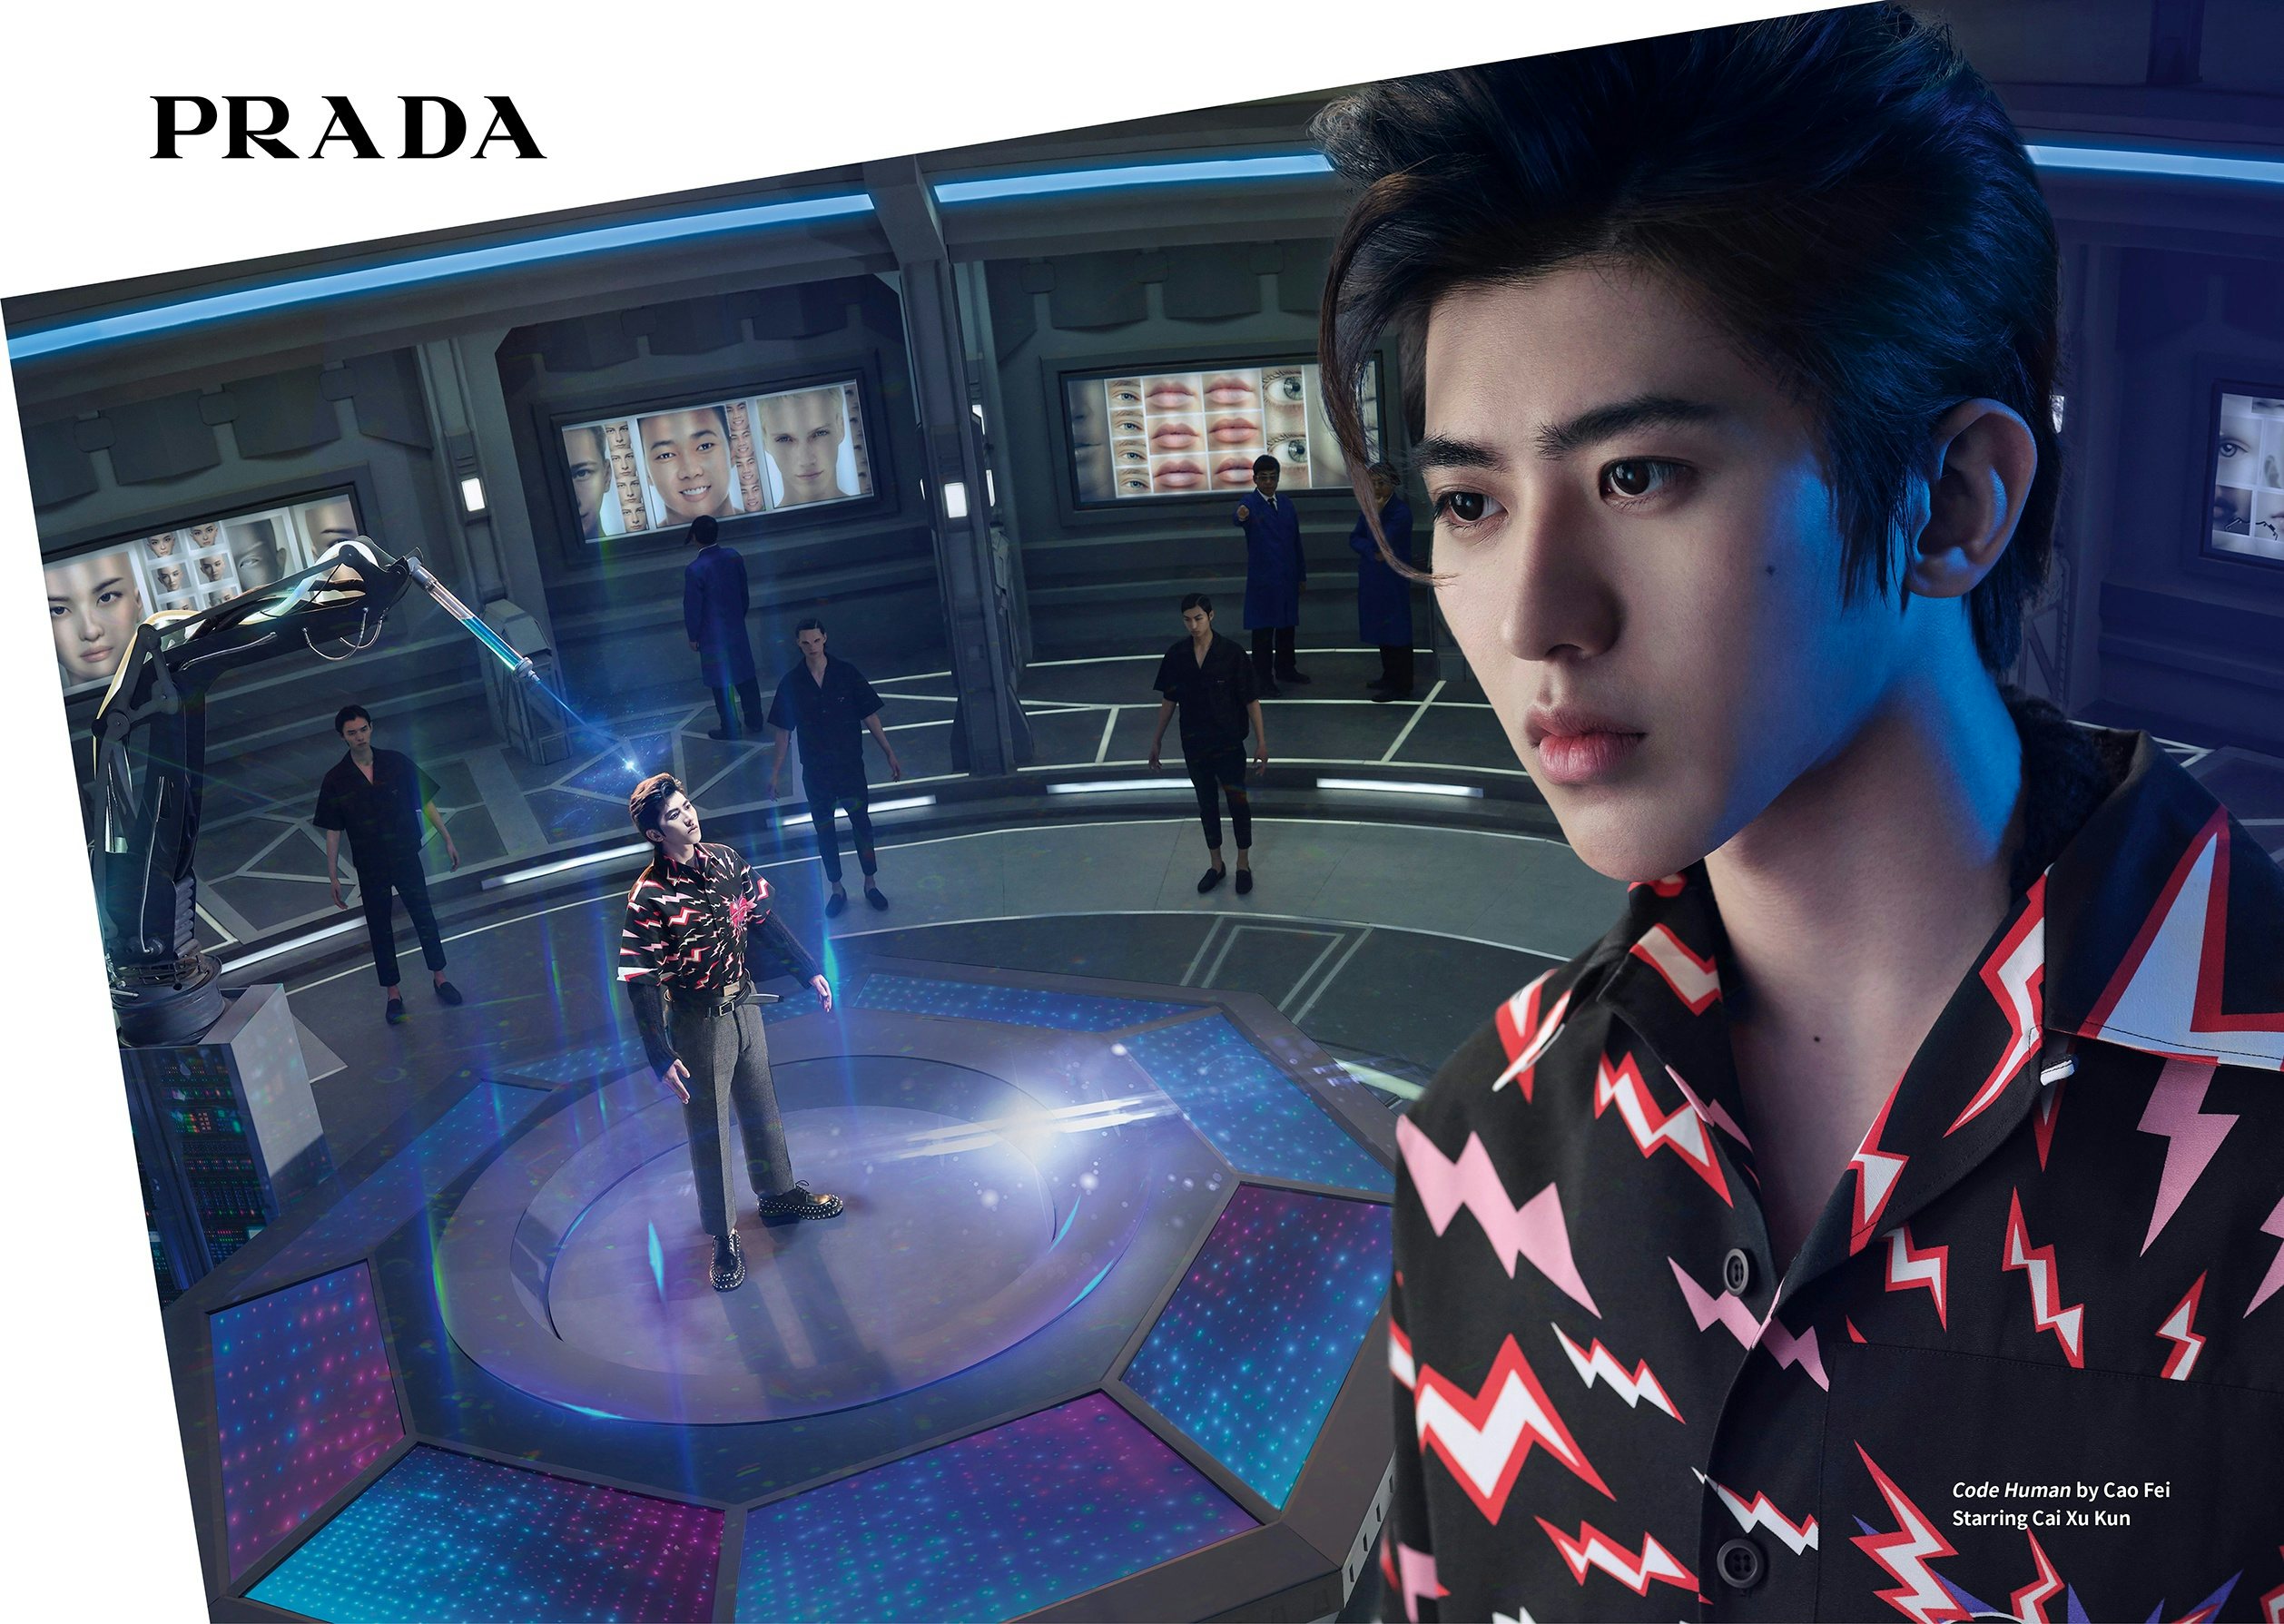 Italian luxury giant Prada named the Chinese singer, rapper and actor Cai Xukun, who was born in 1998, to be its Chinese brand ambassador. Photo: courtesy of Prada